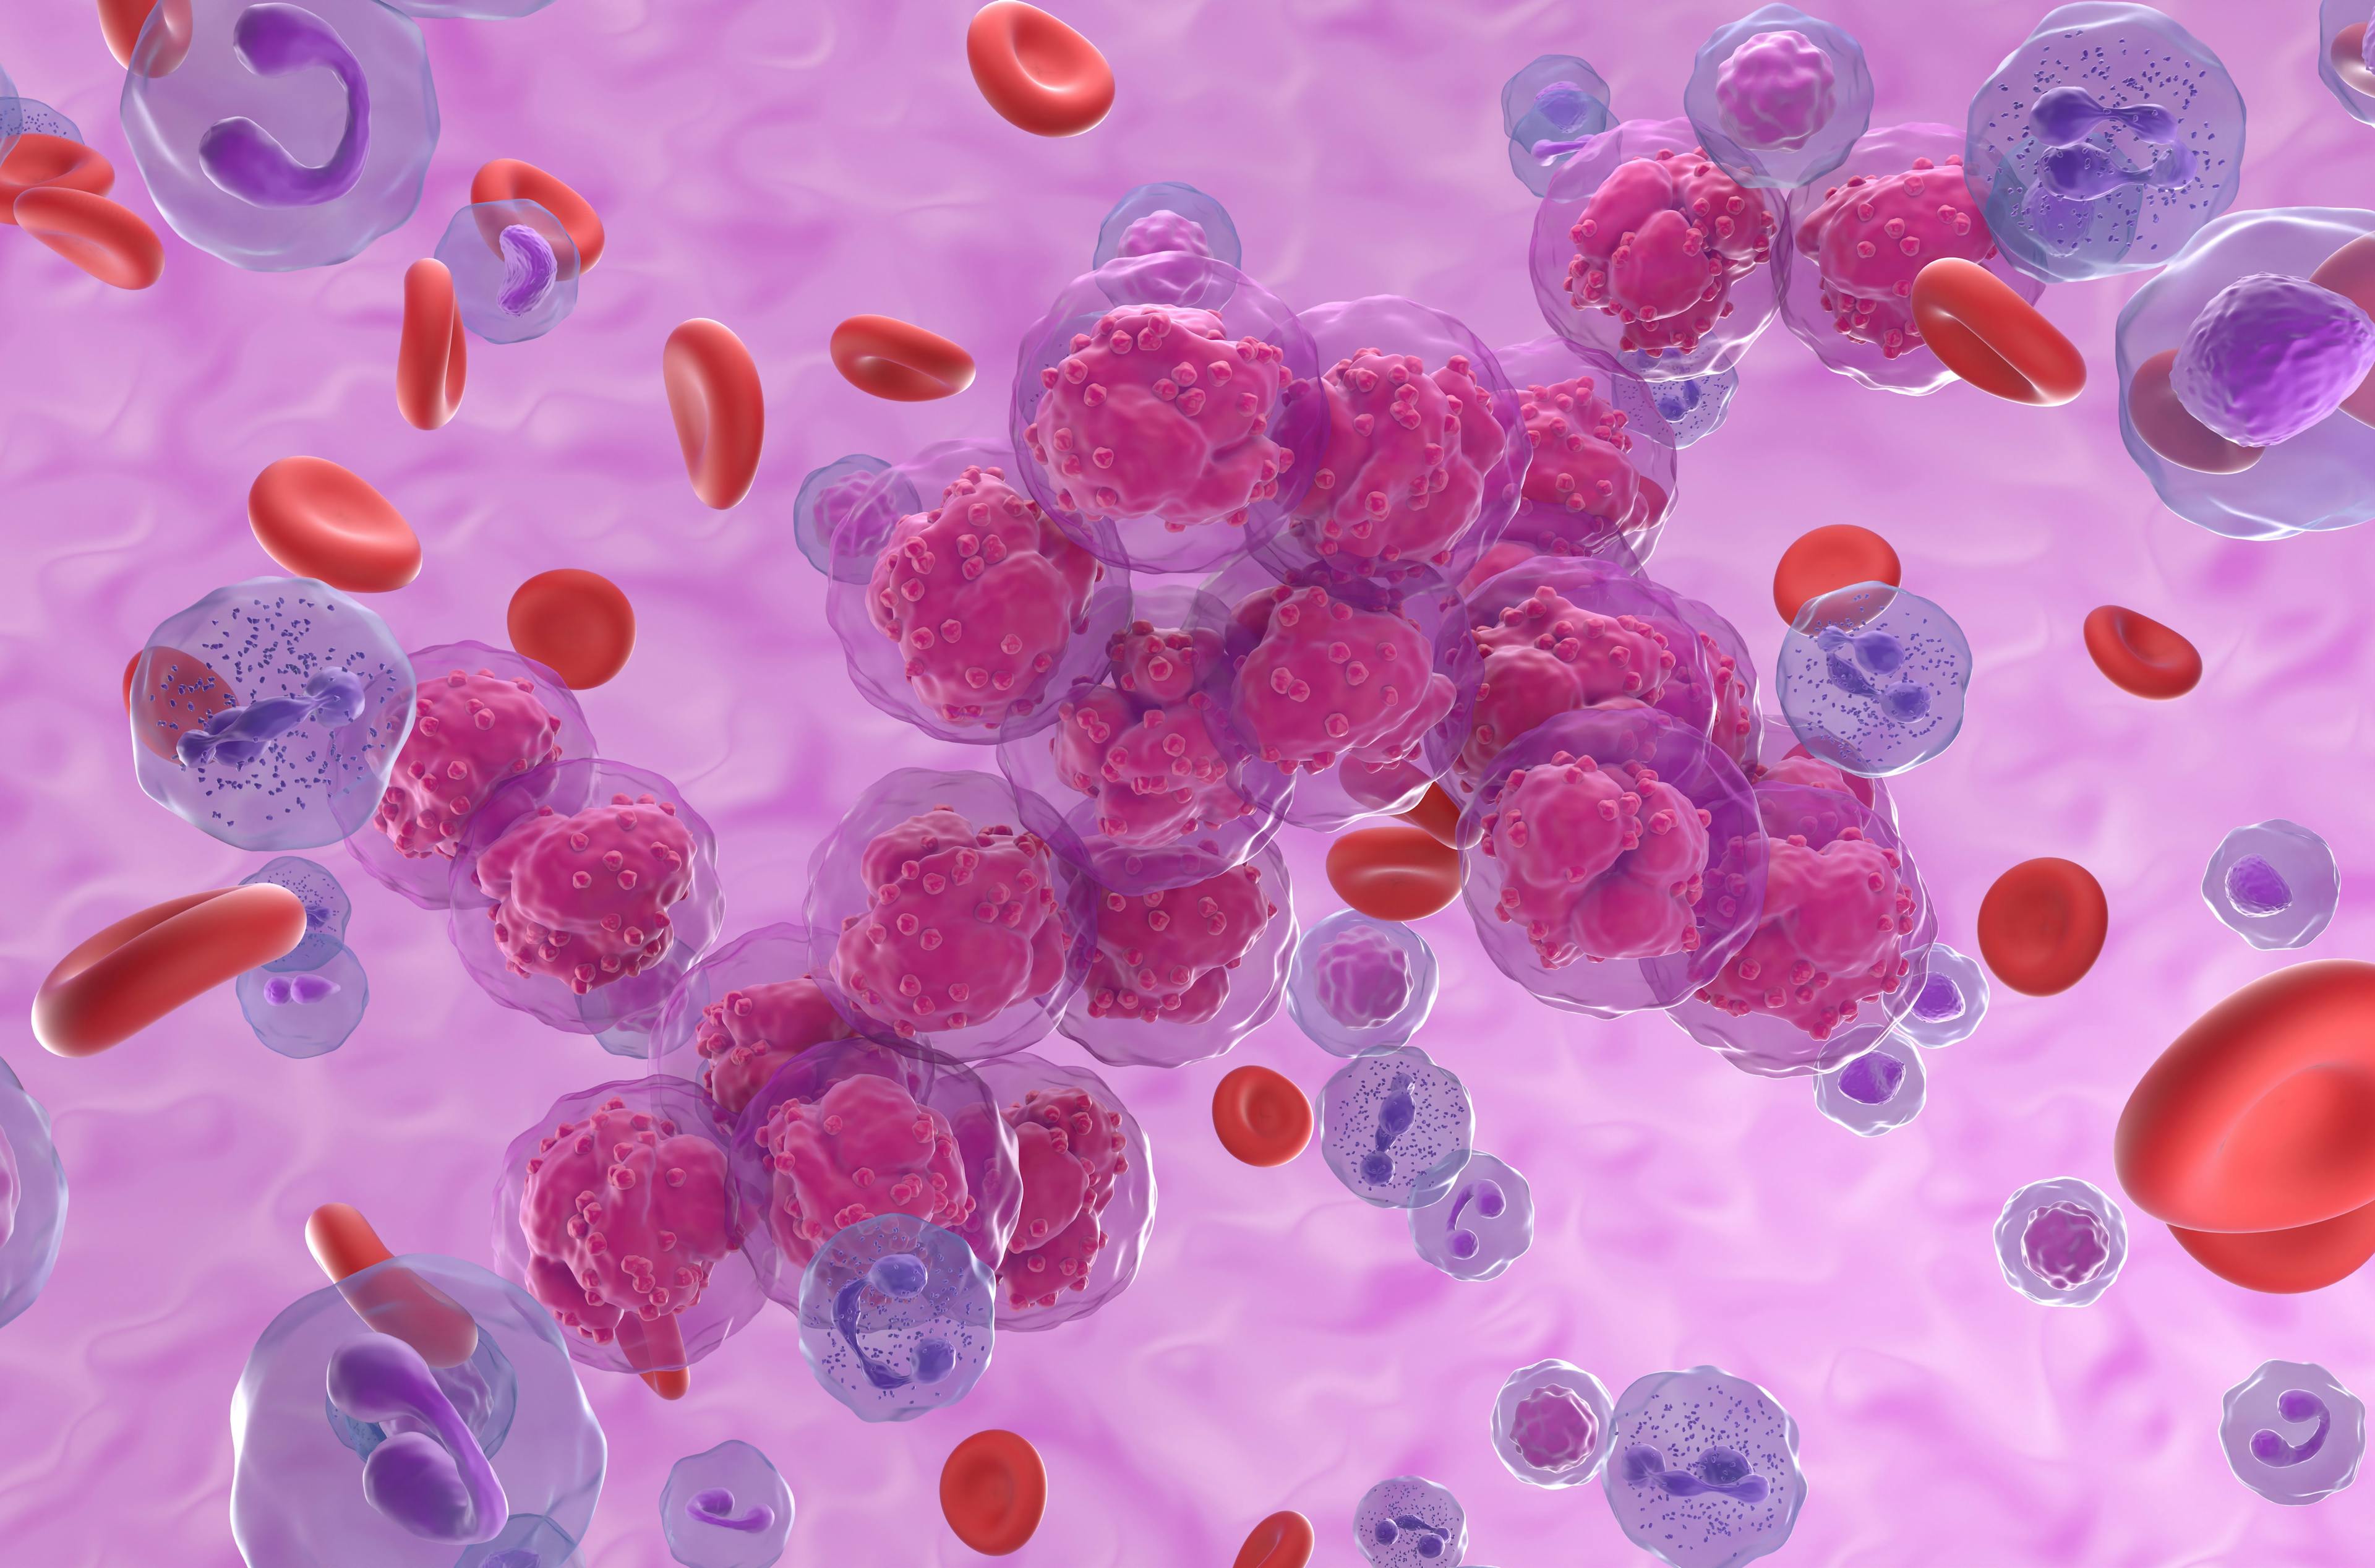 Acute lymphoblastic leukemia (ALL) cancer cell clusters in the blood flow - isometric view 3d illustration | Image Credit: © LASZLO - www.stock.adobe.com